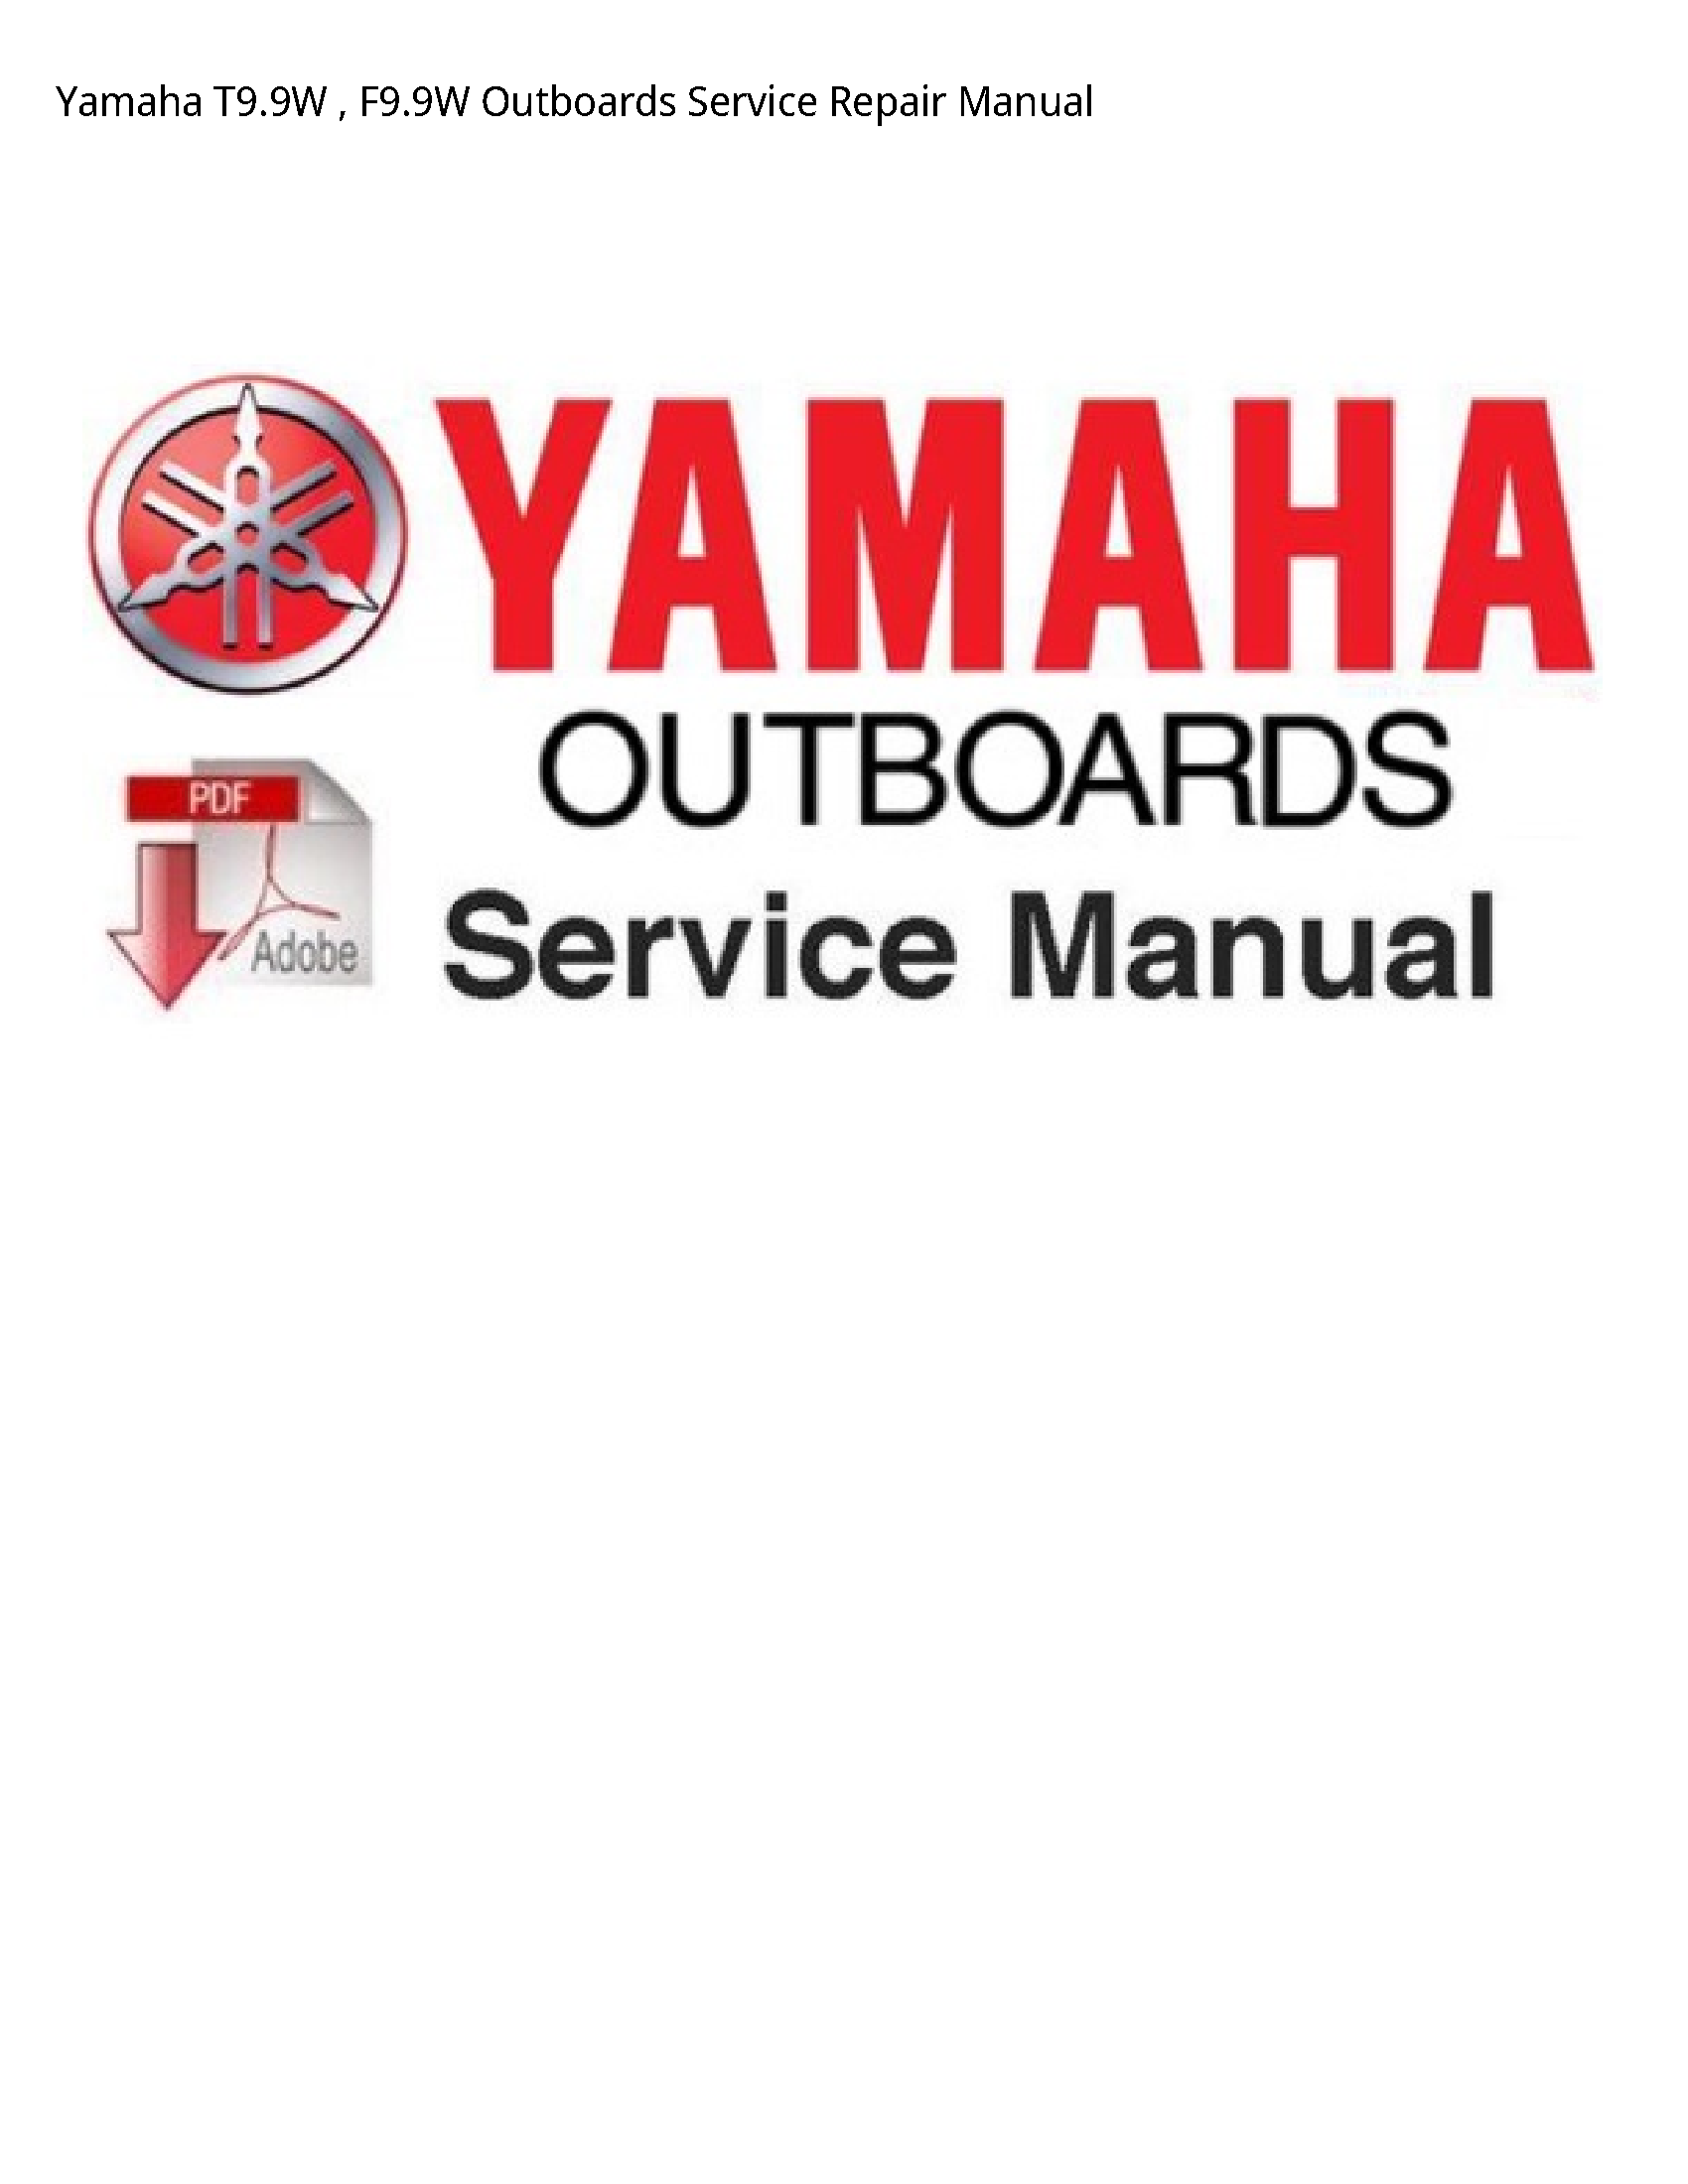 Yamaha T9.9W Outboards manual